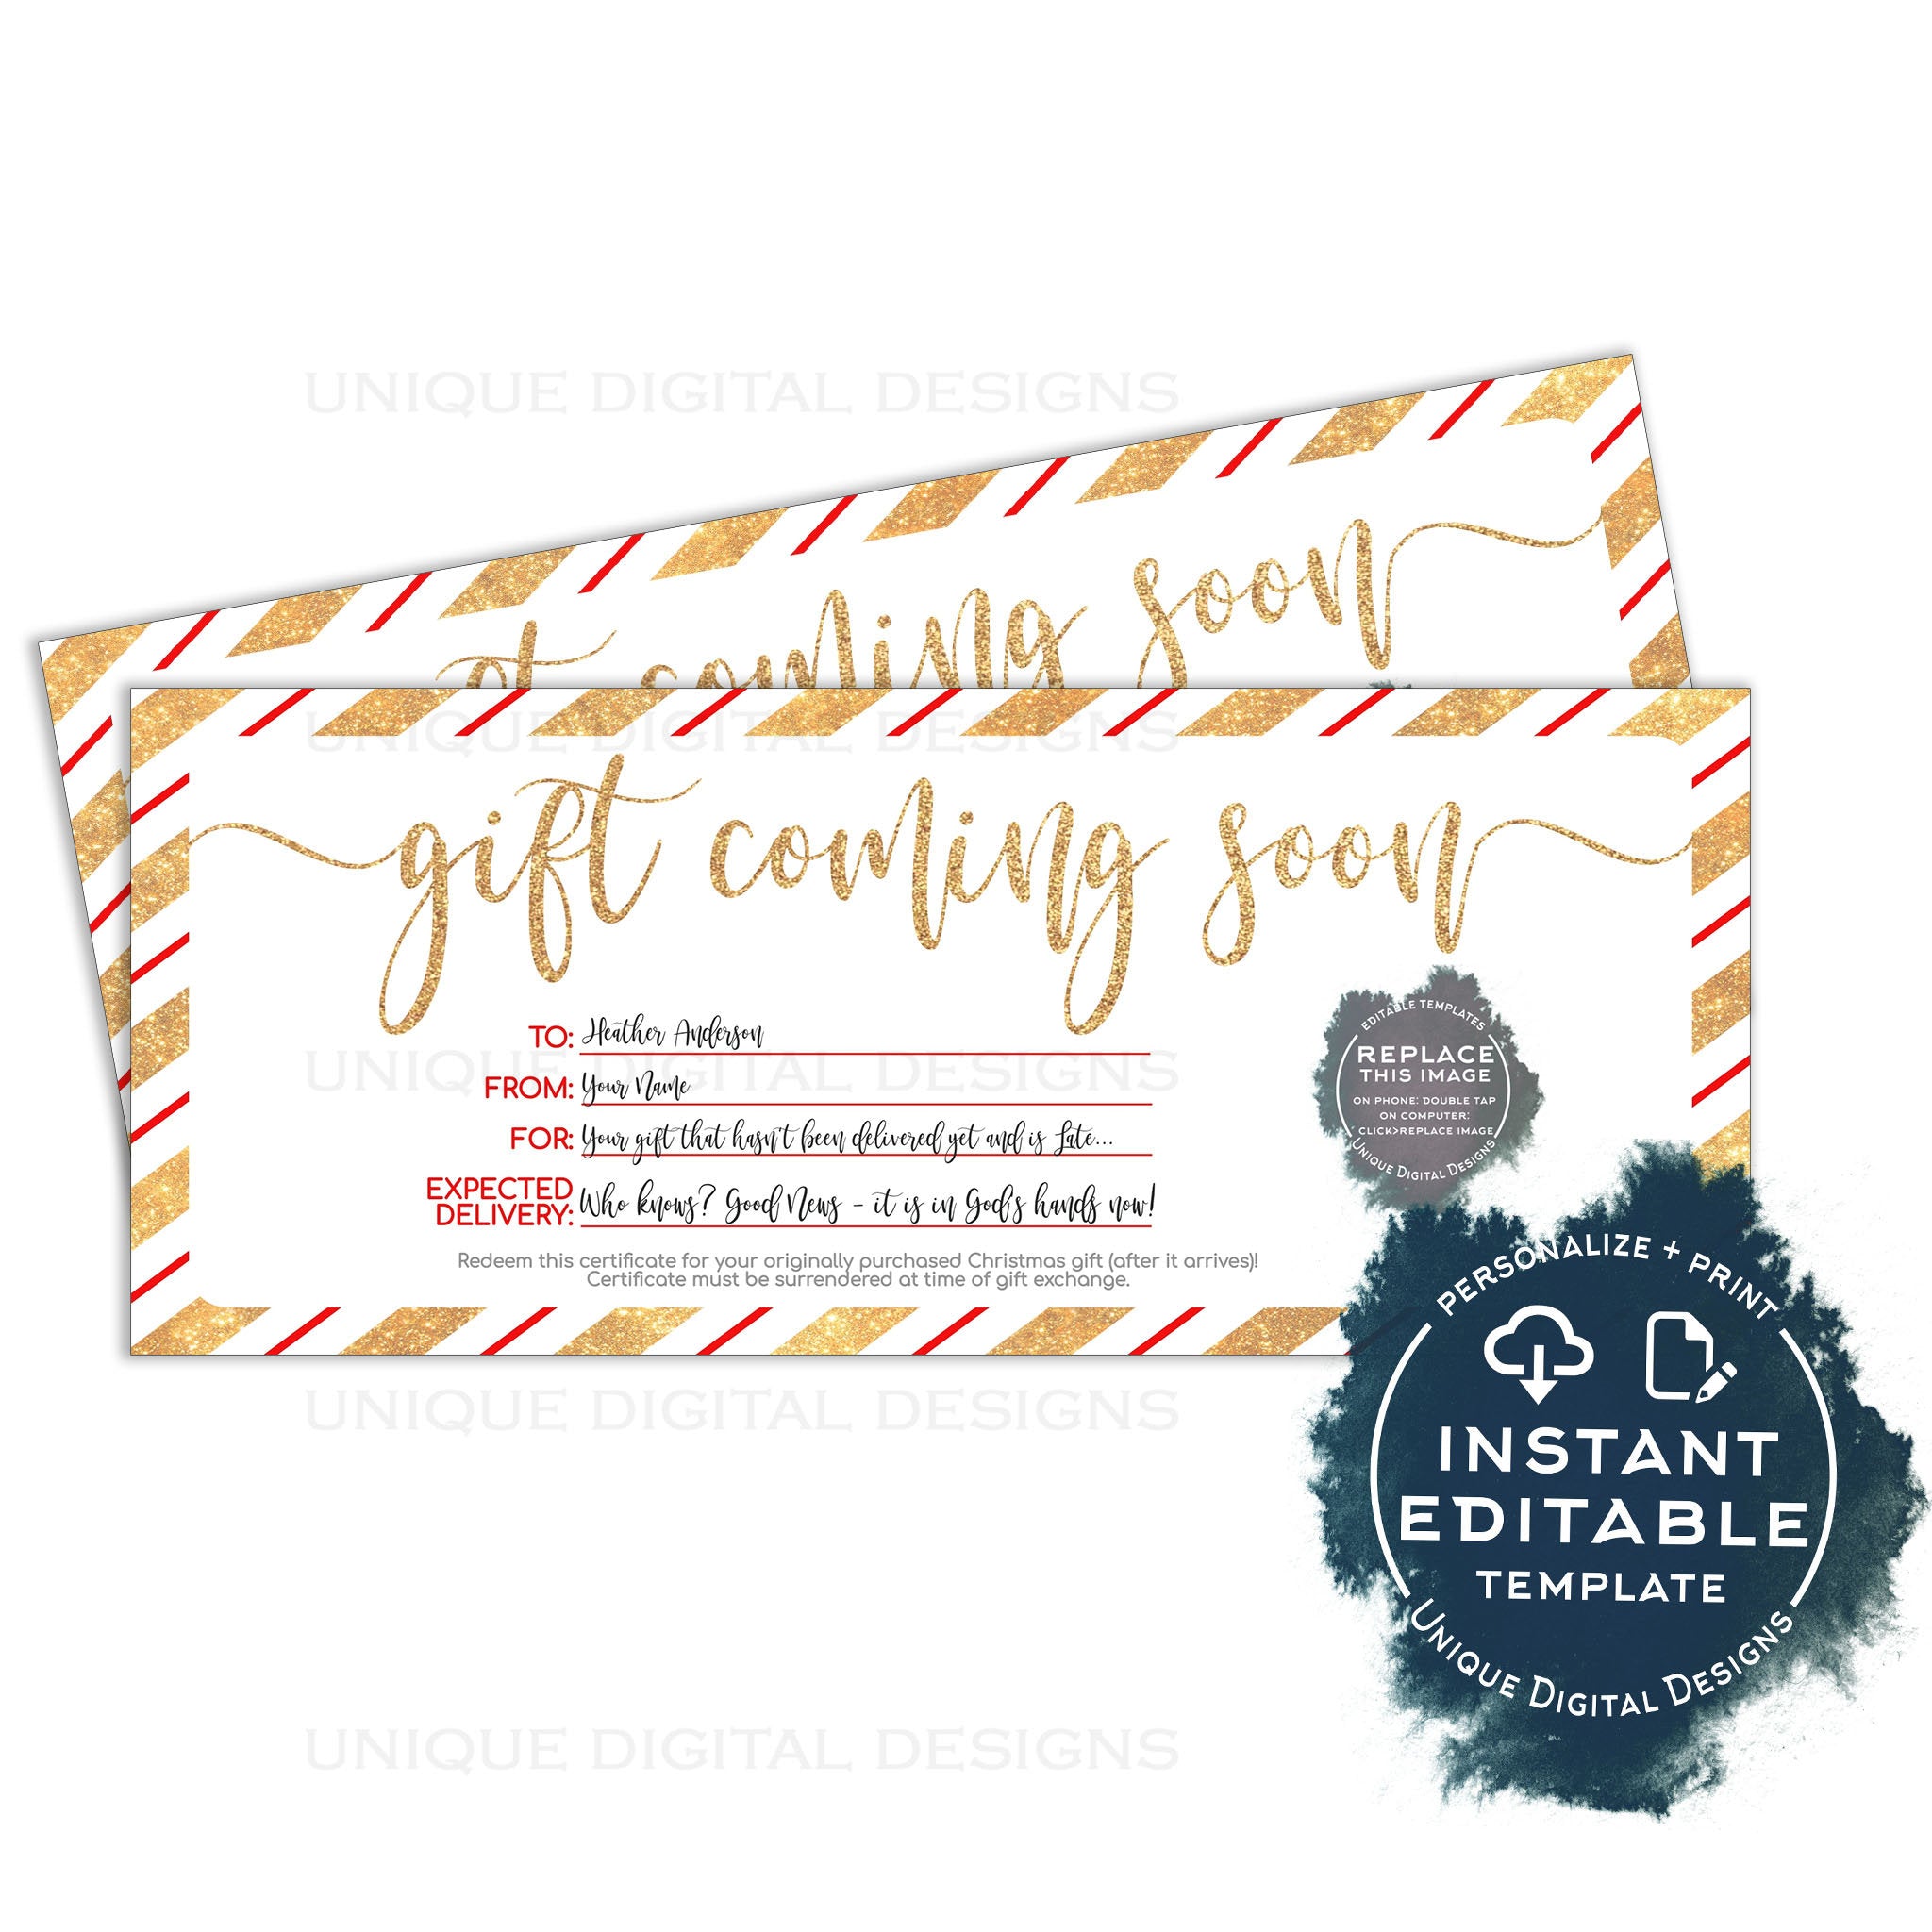 CleverDelights Gift Cards and Gift Certificate